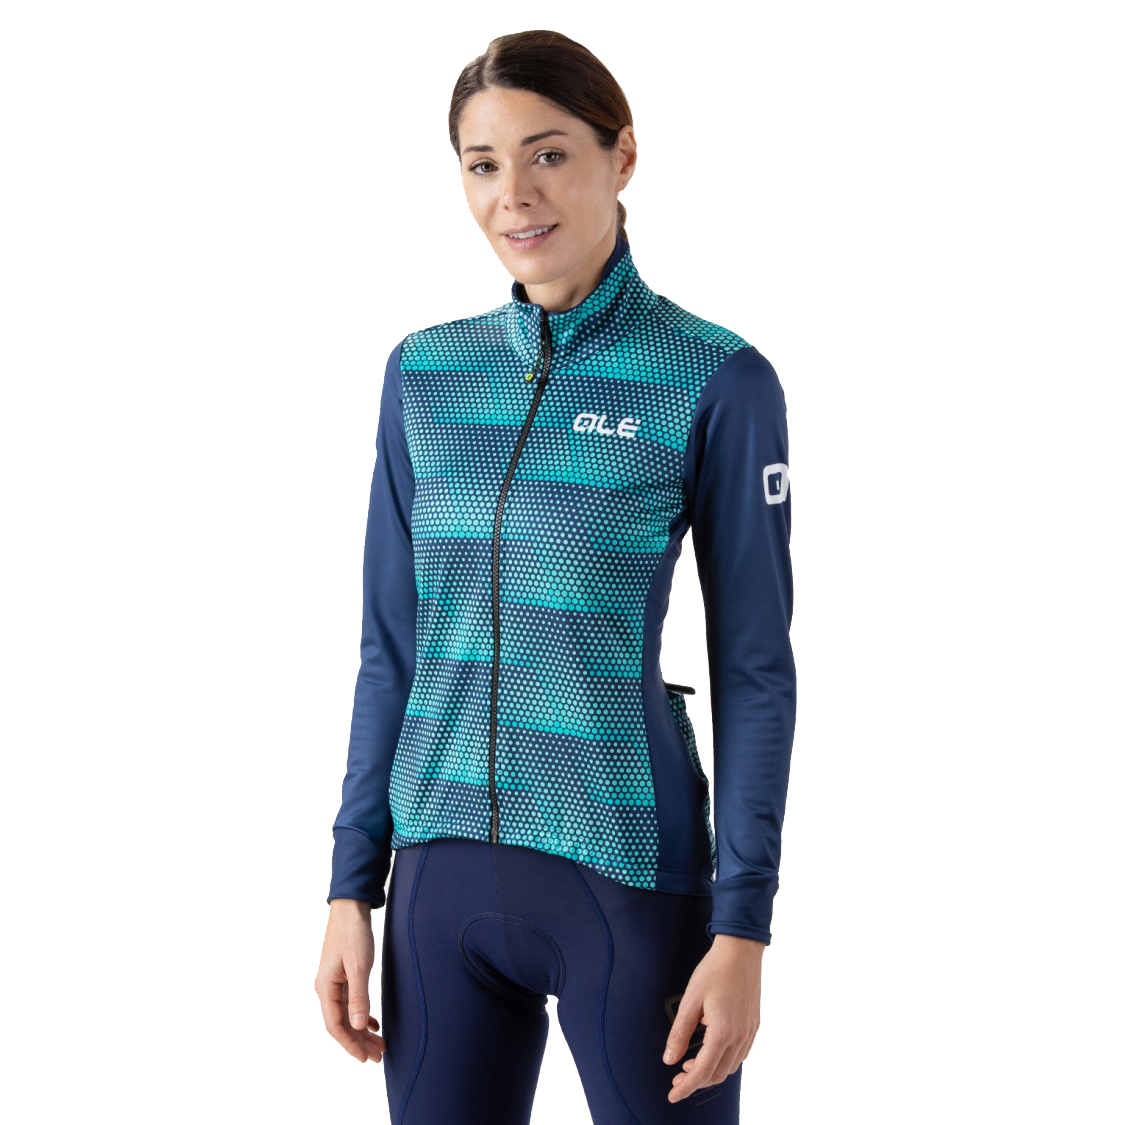 Picture of Alé SOLID Sharp Lady Jacket - turquoise